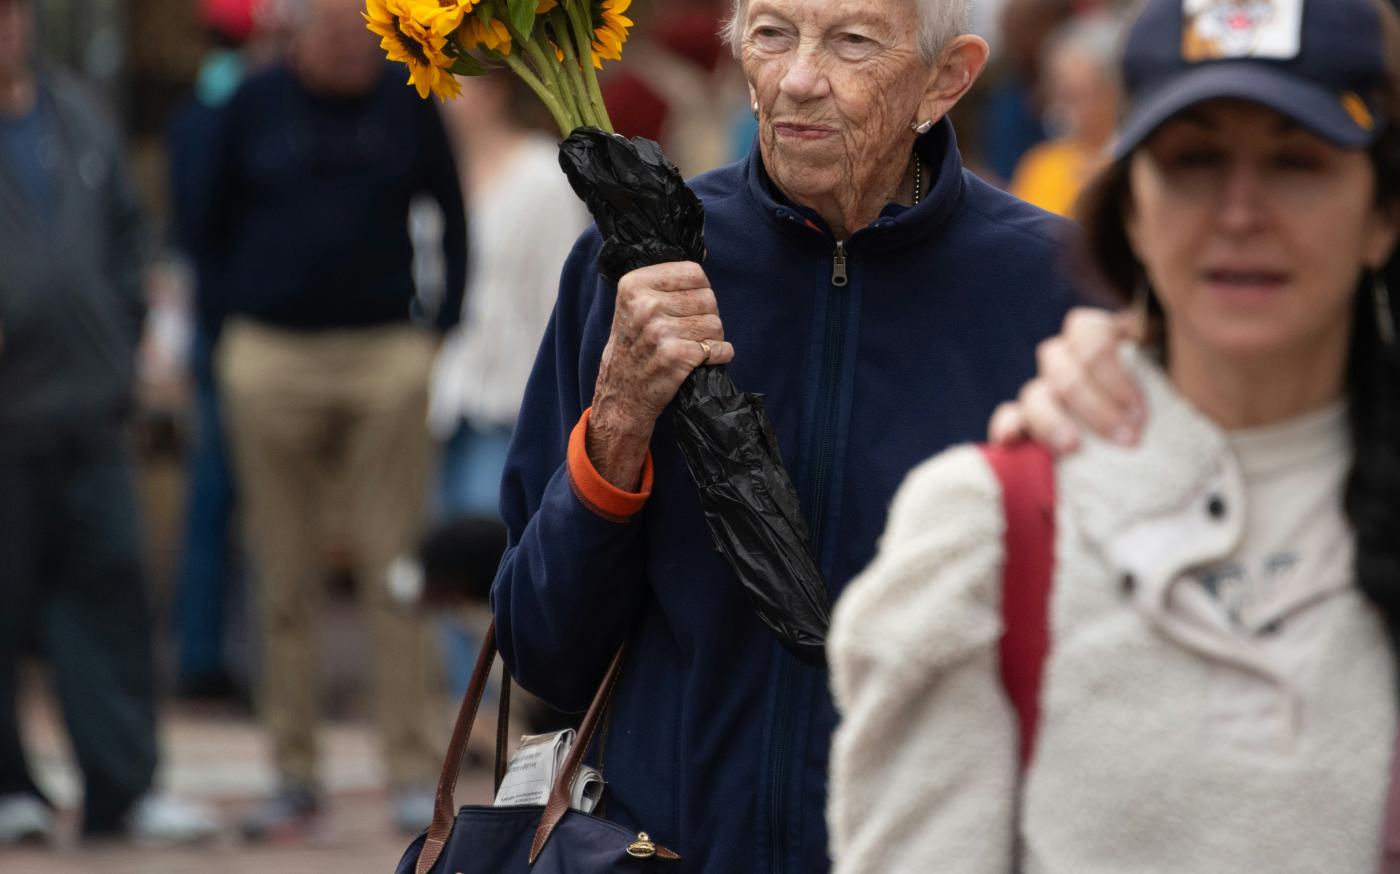 A man holding a bouquet of sunflowers while walking down a street by Joseph Corl courtesy of Unsplash.